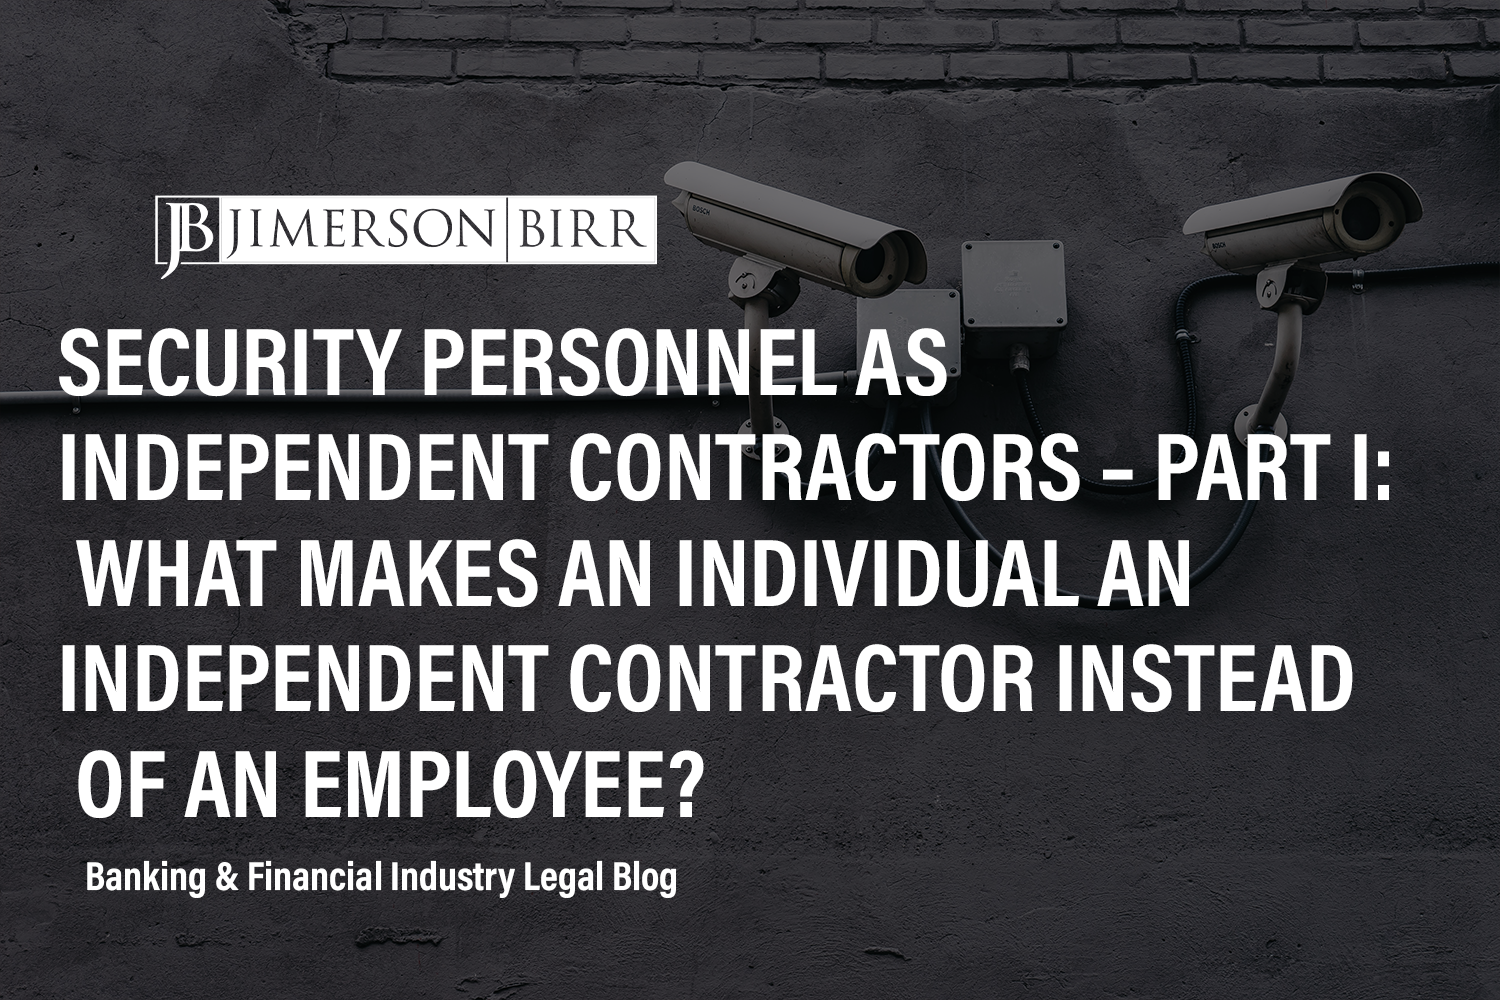 Security Personnel as Independent Contractors – Part I: What Makes an Individual an Independent Contractor Instead of an Employee?